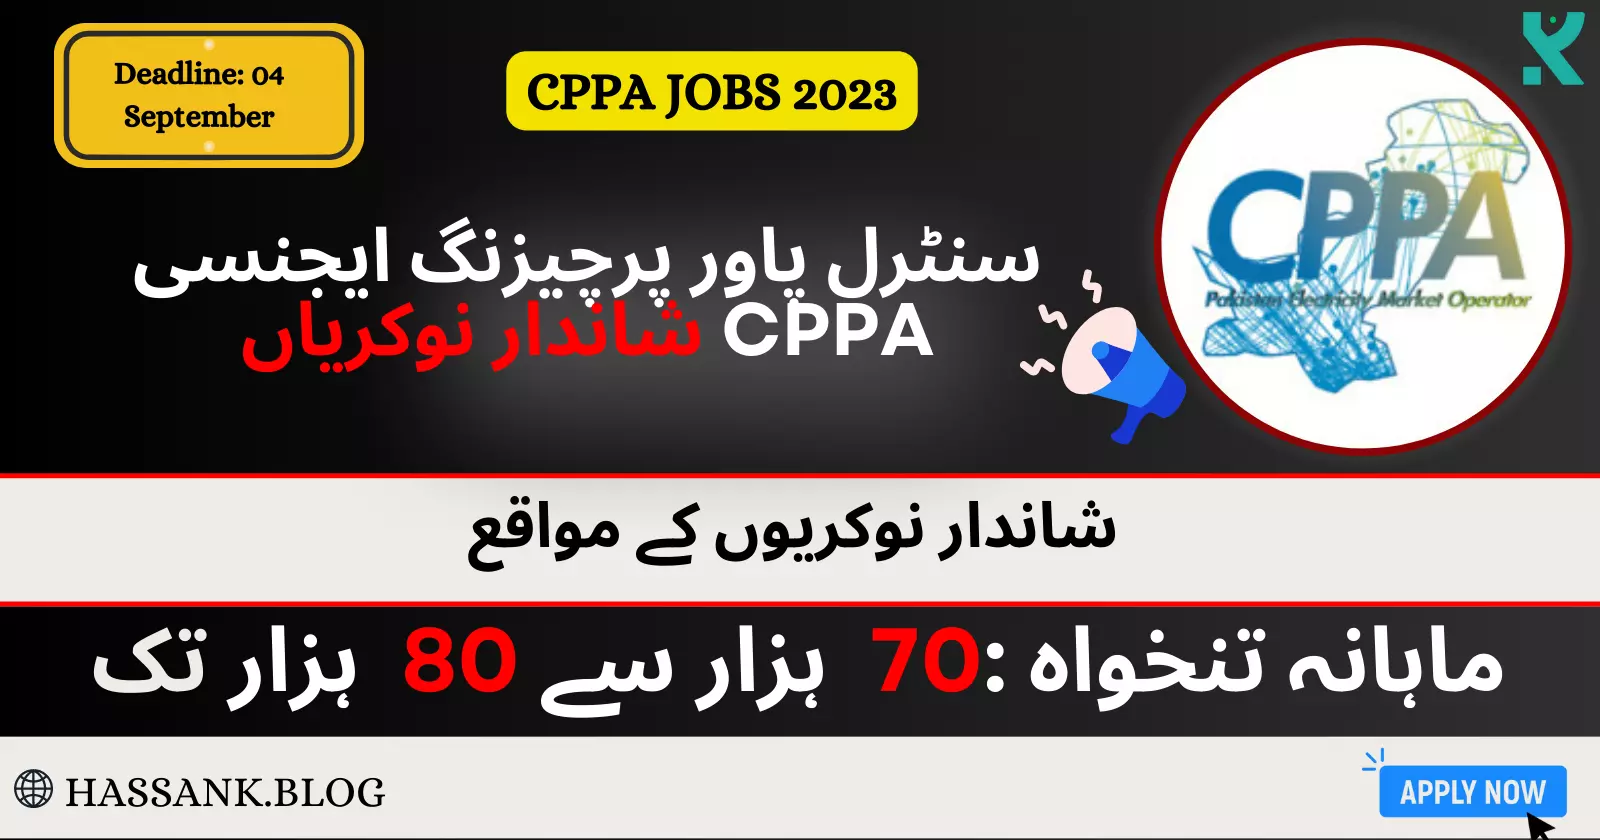 Central Power Purchasing Agency CPPA